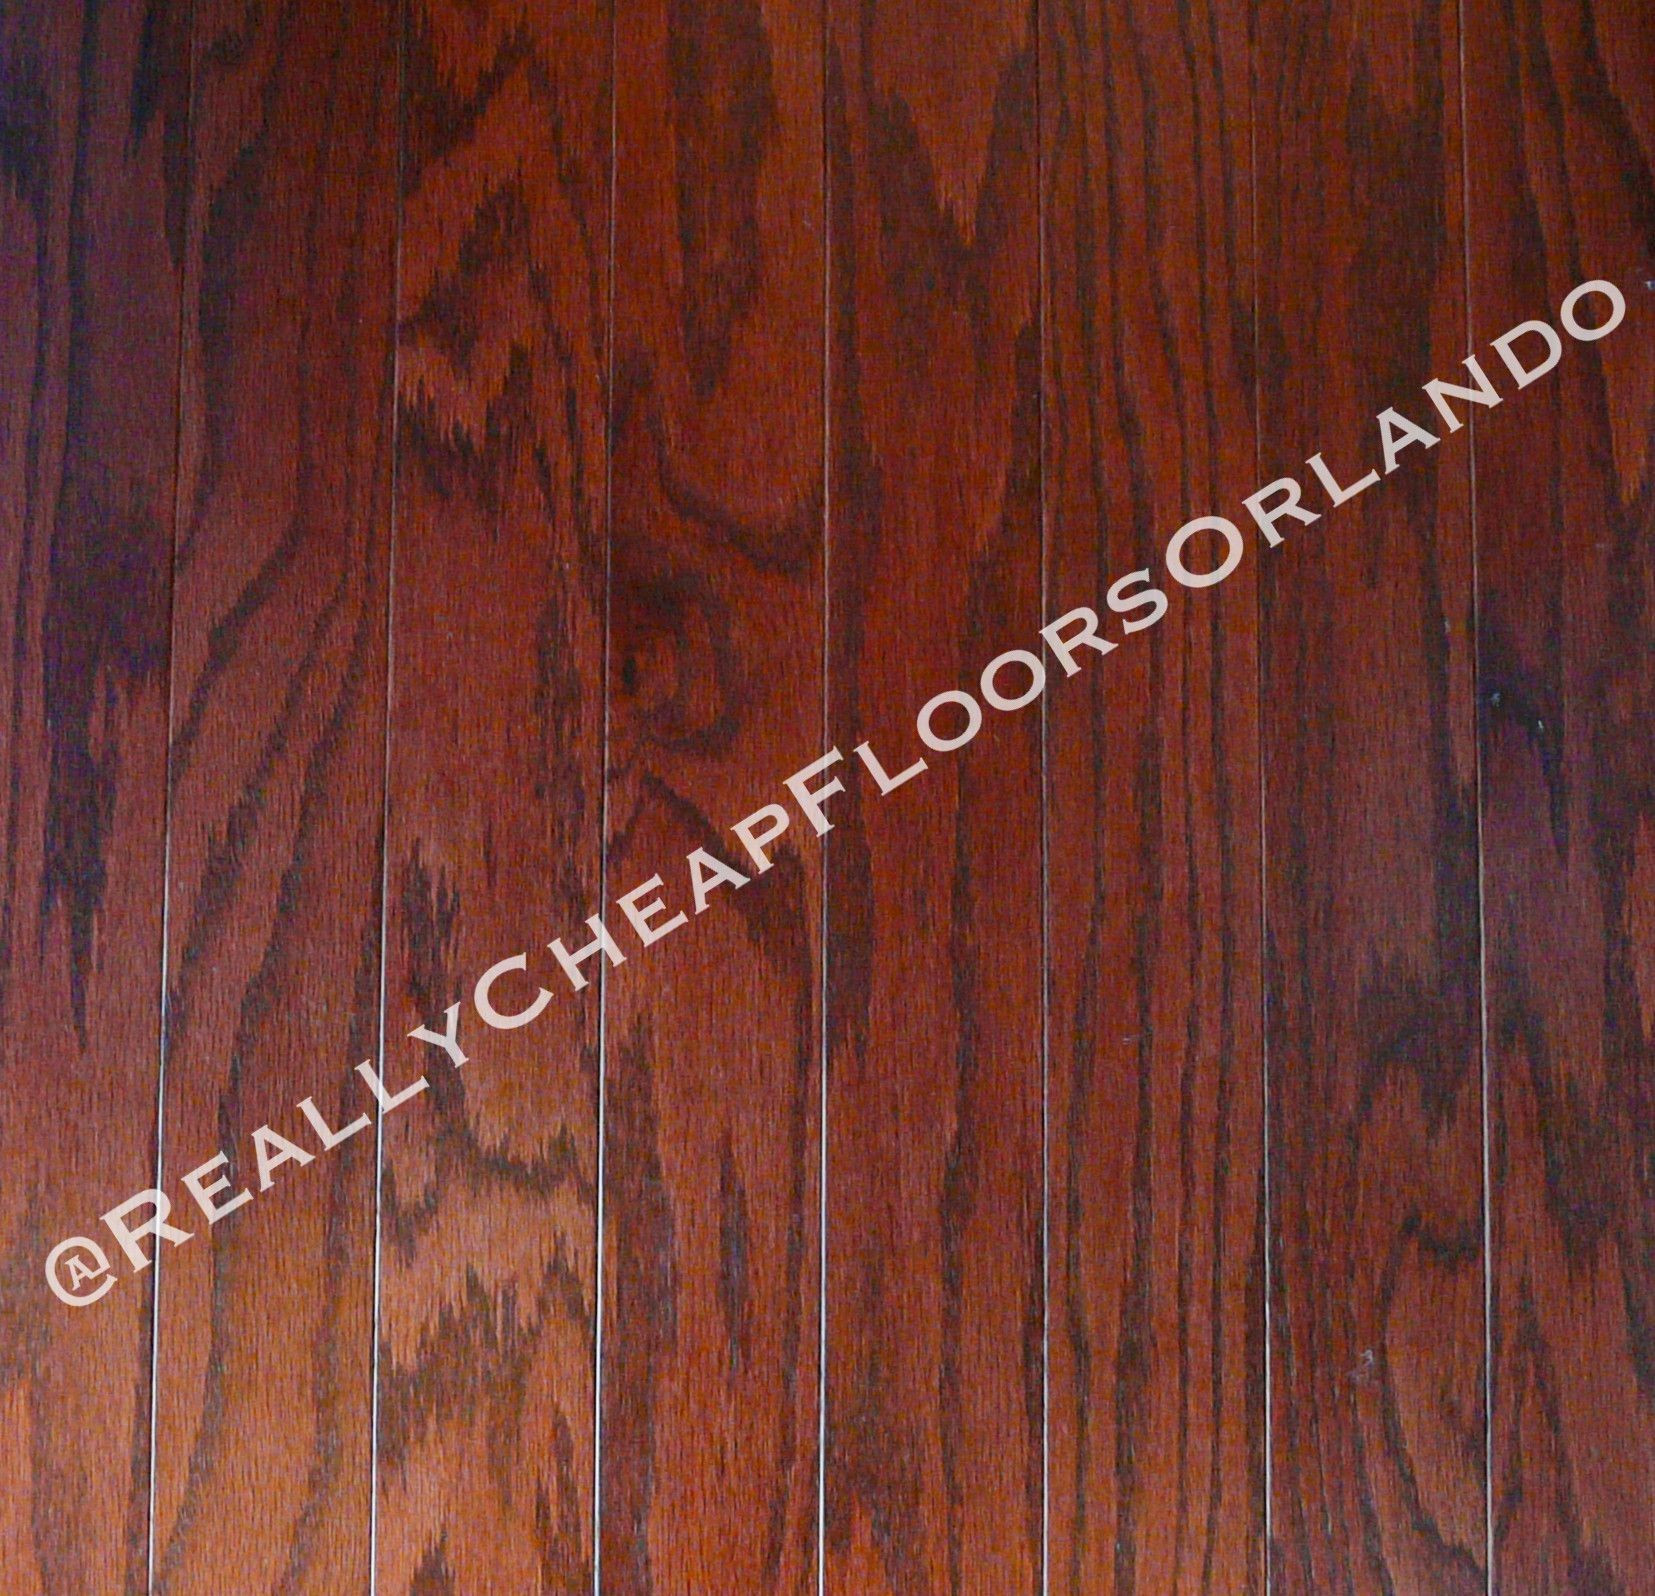 15 Great Hardwood Floor Supply 2024 free download hardwood floor supply of 19 new cheapest hardwood flooring photograph dizpos com within cheapest hardwood flooring inspirational american made hardwood flooring at the cheapest prices locate